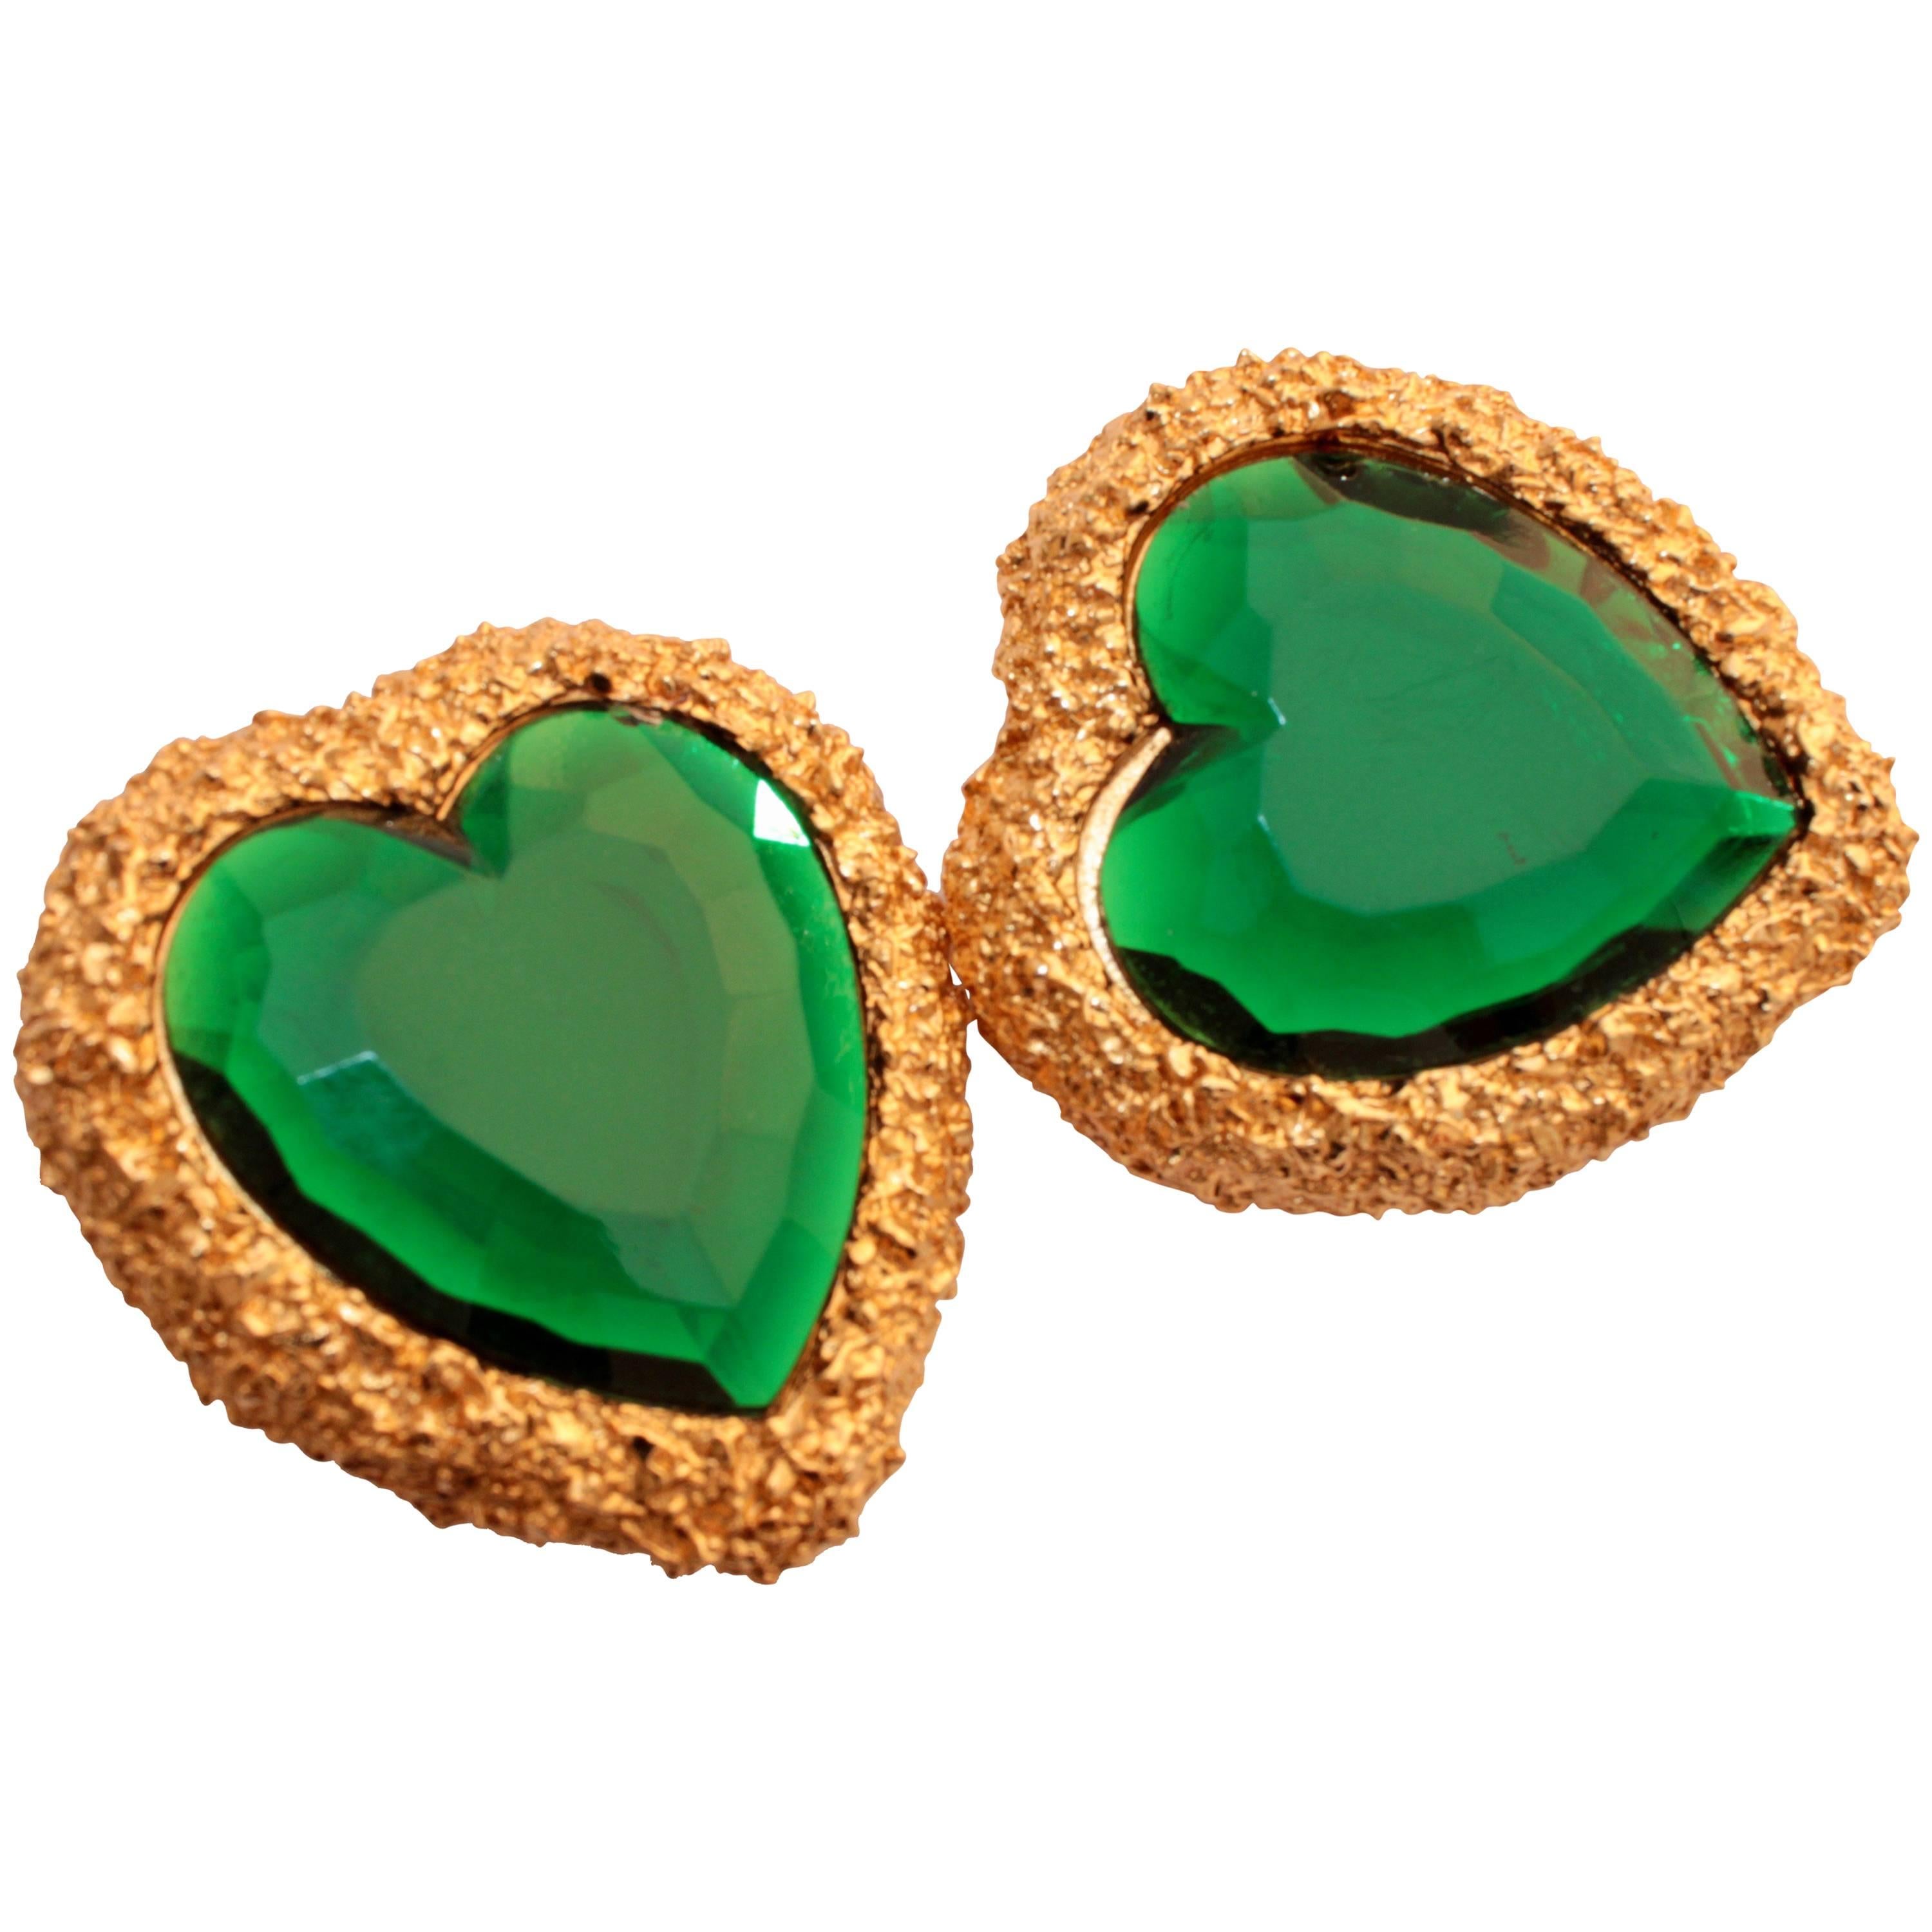 D'Orlan Earrings Oversized Heart Shape Statement Emerald Green and Gold 1980s 